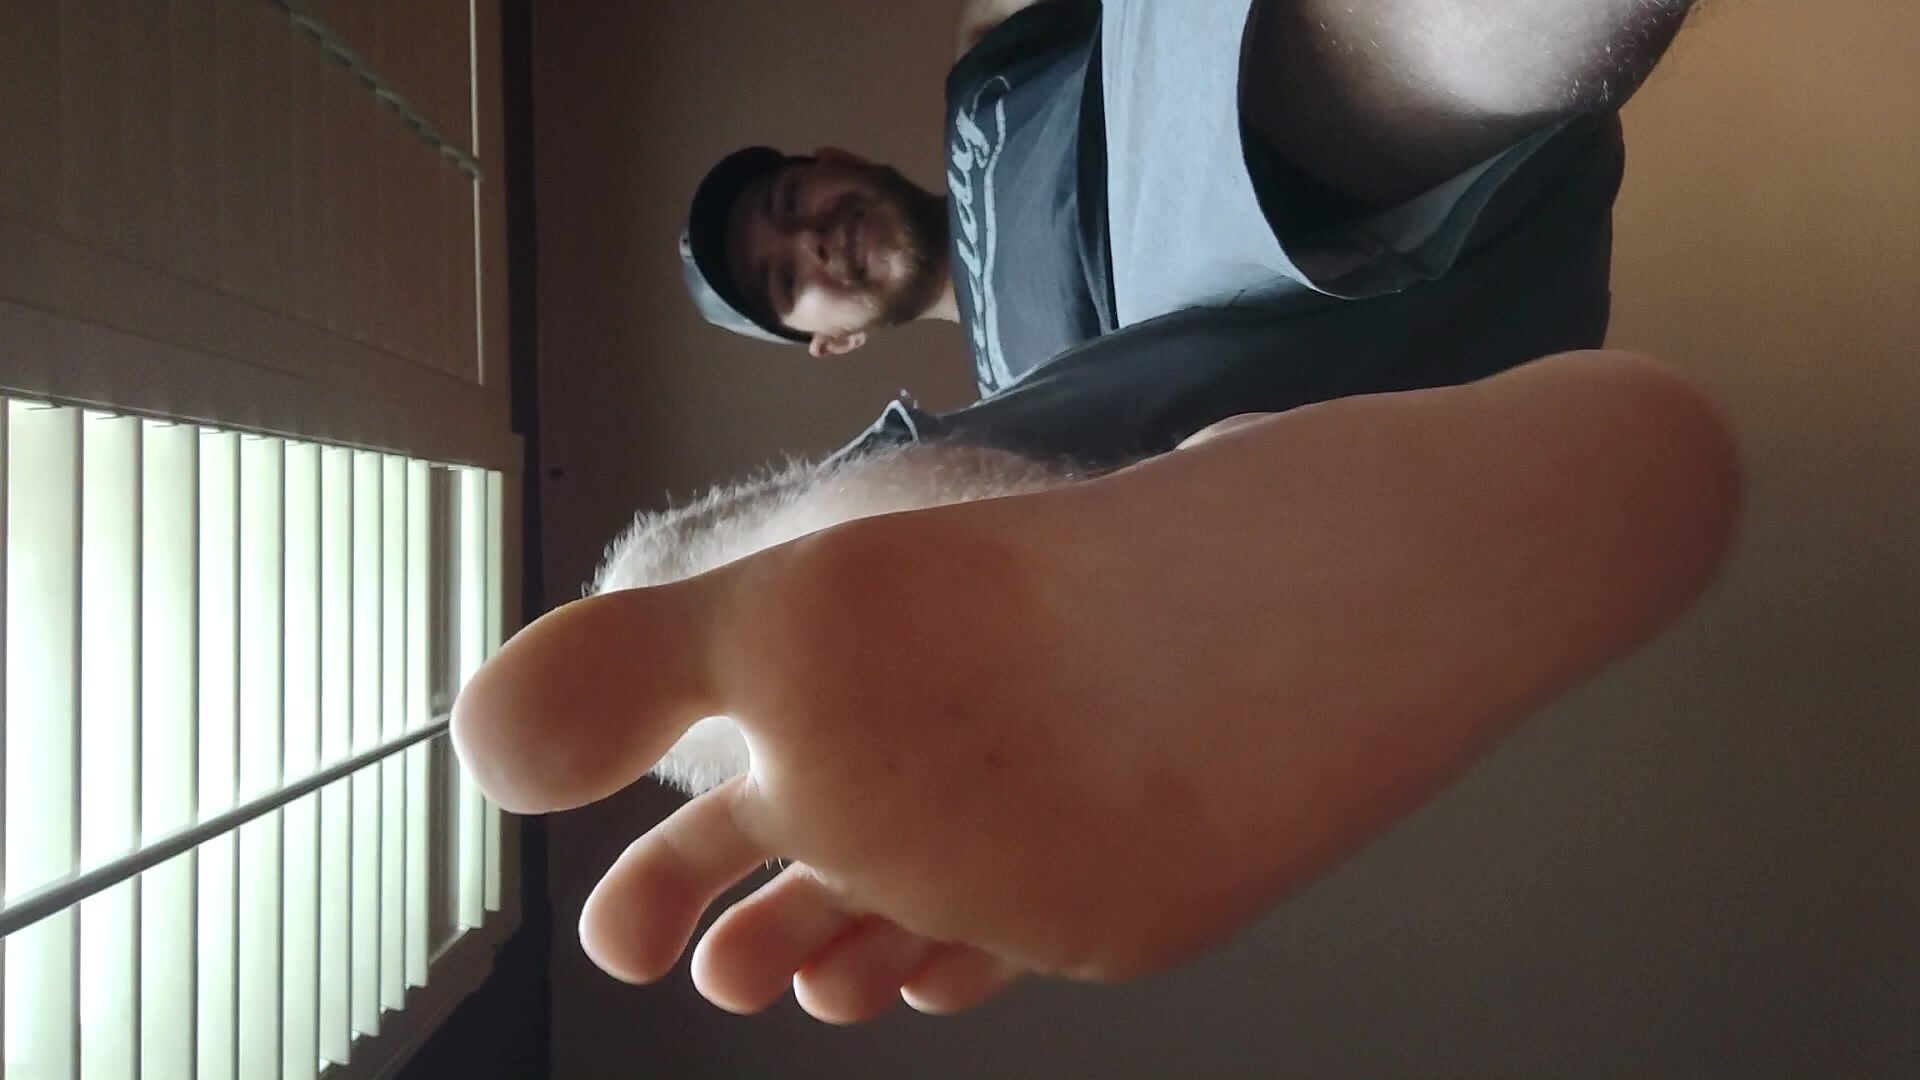 A compilation of my feet and cock